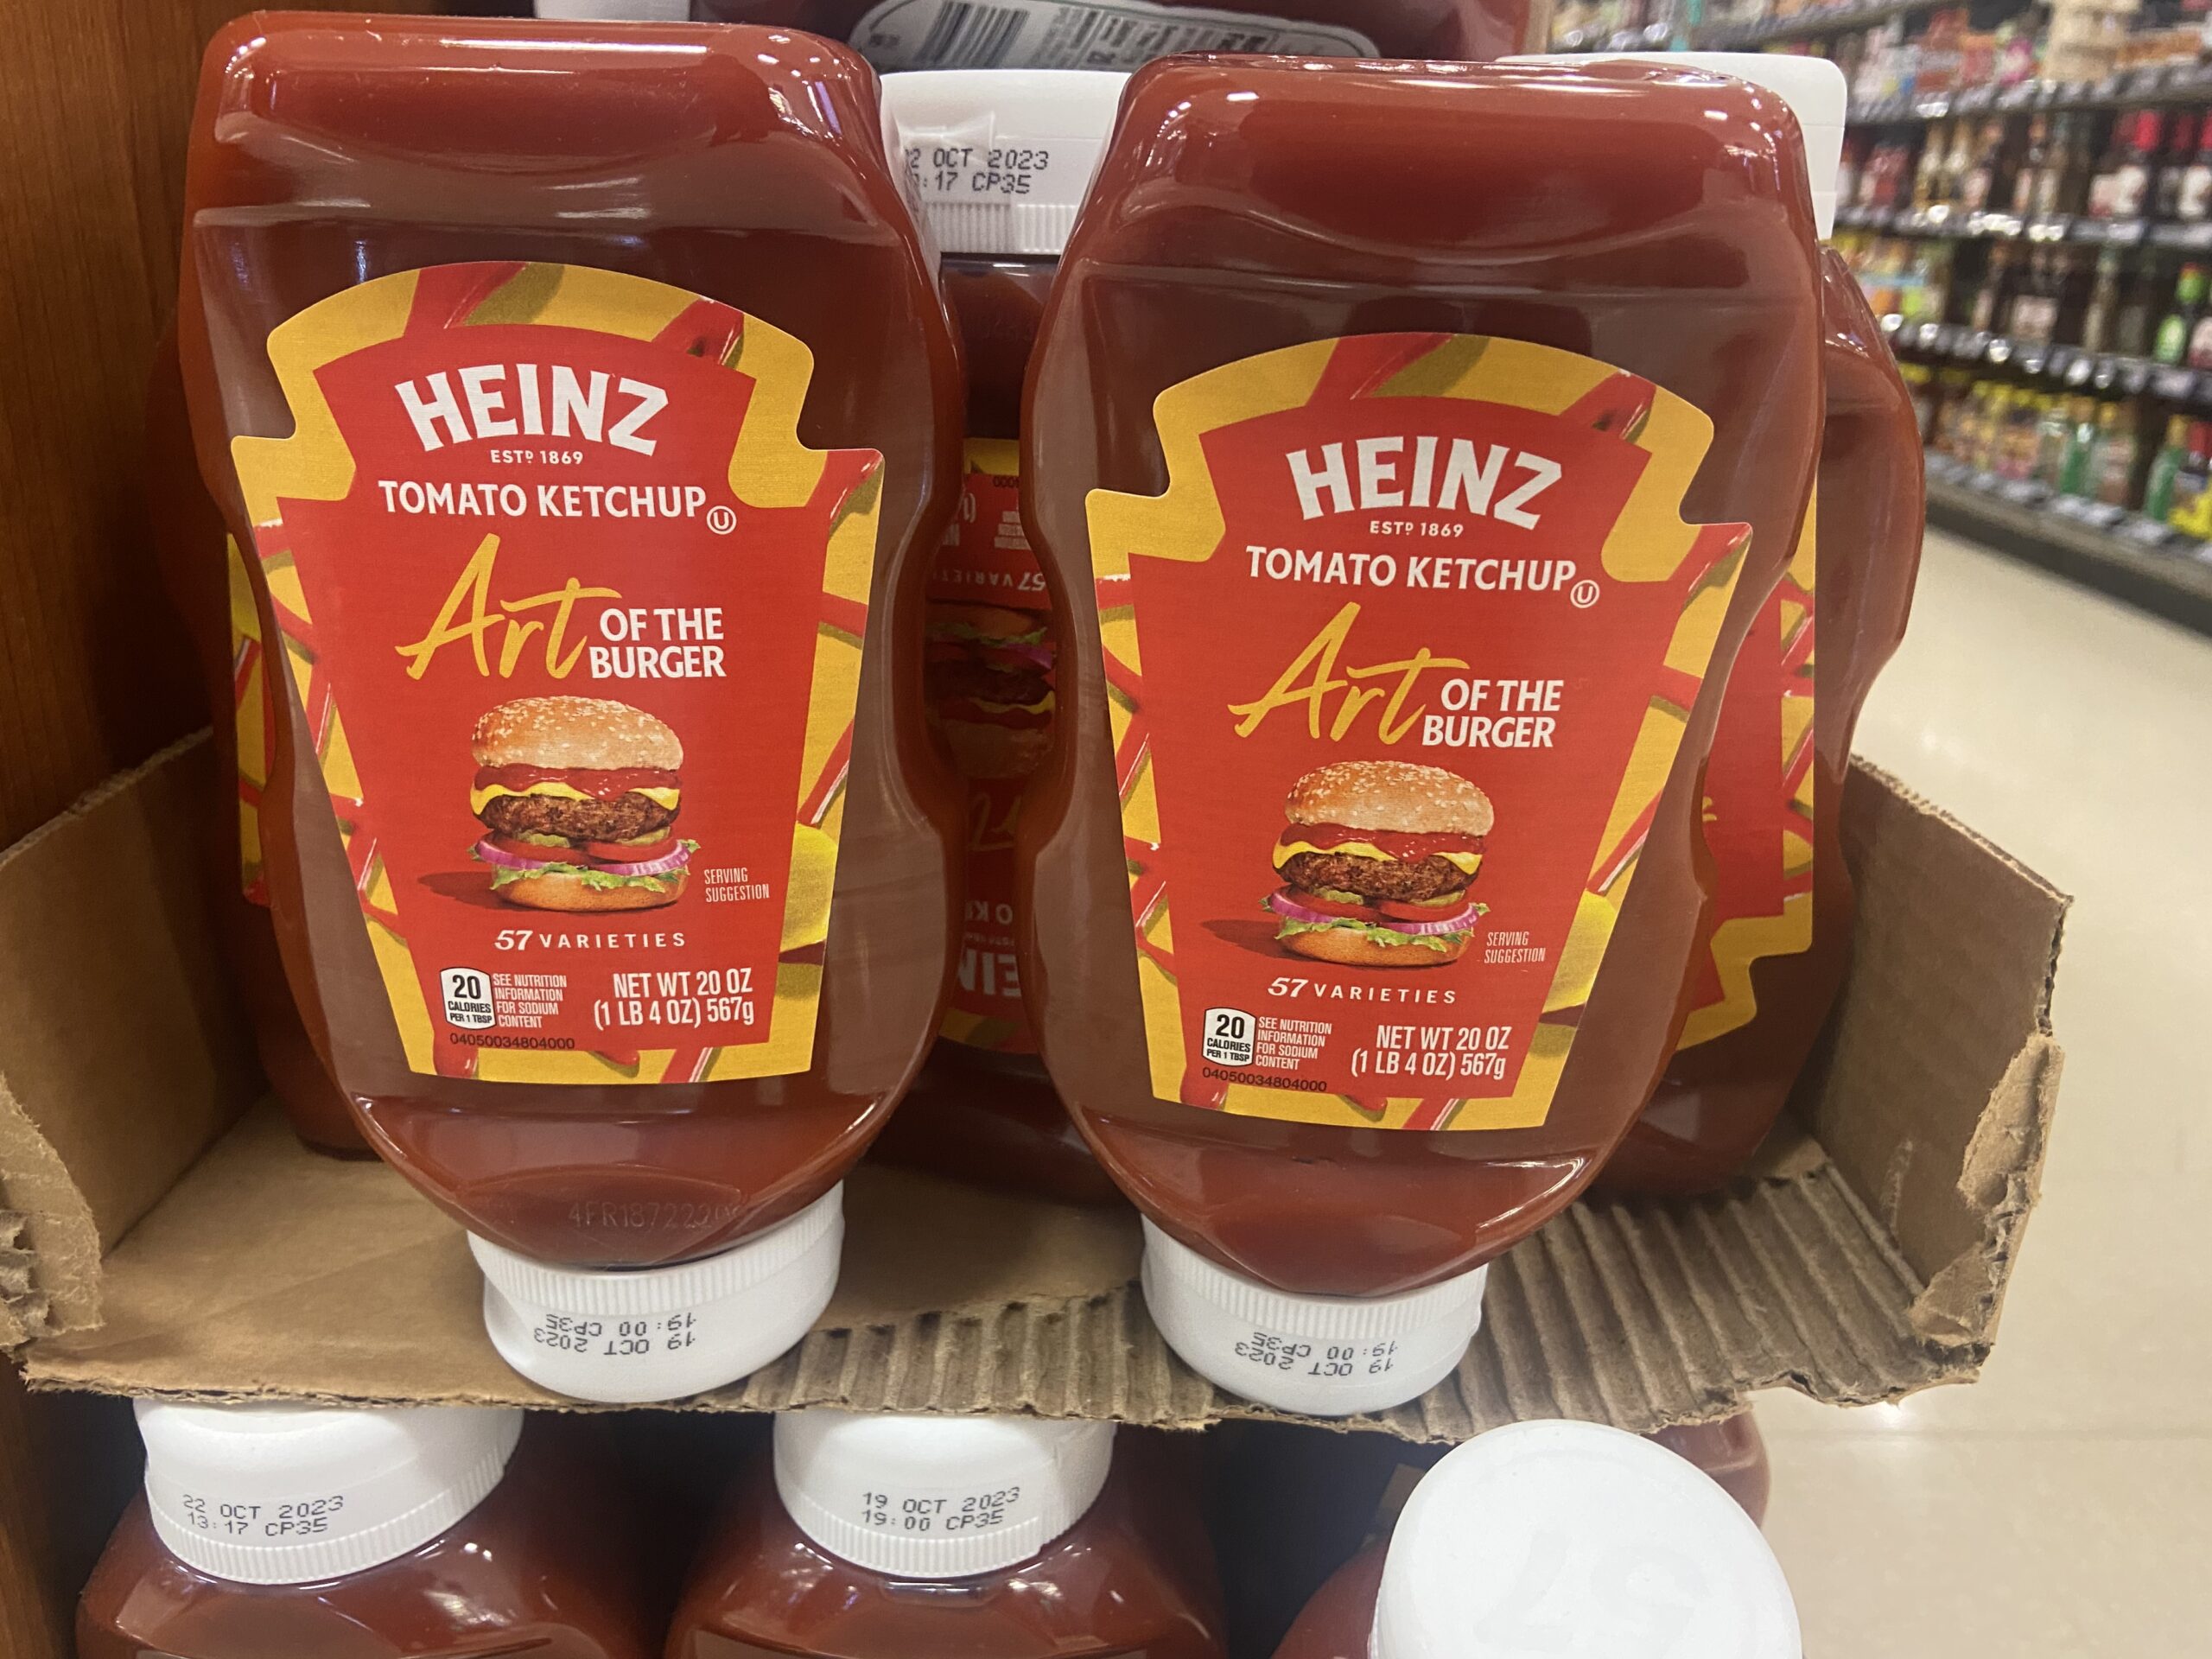 Heinz-Ketchup-Products